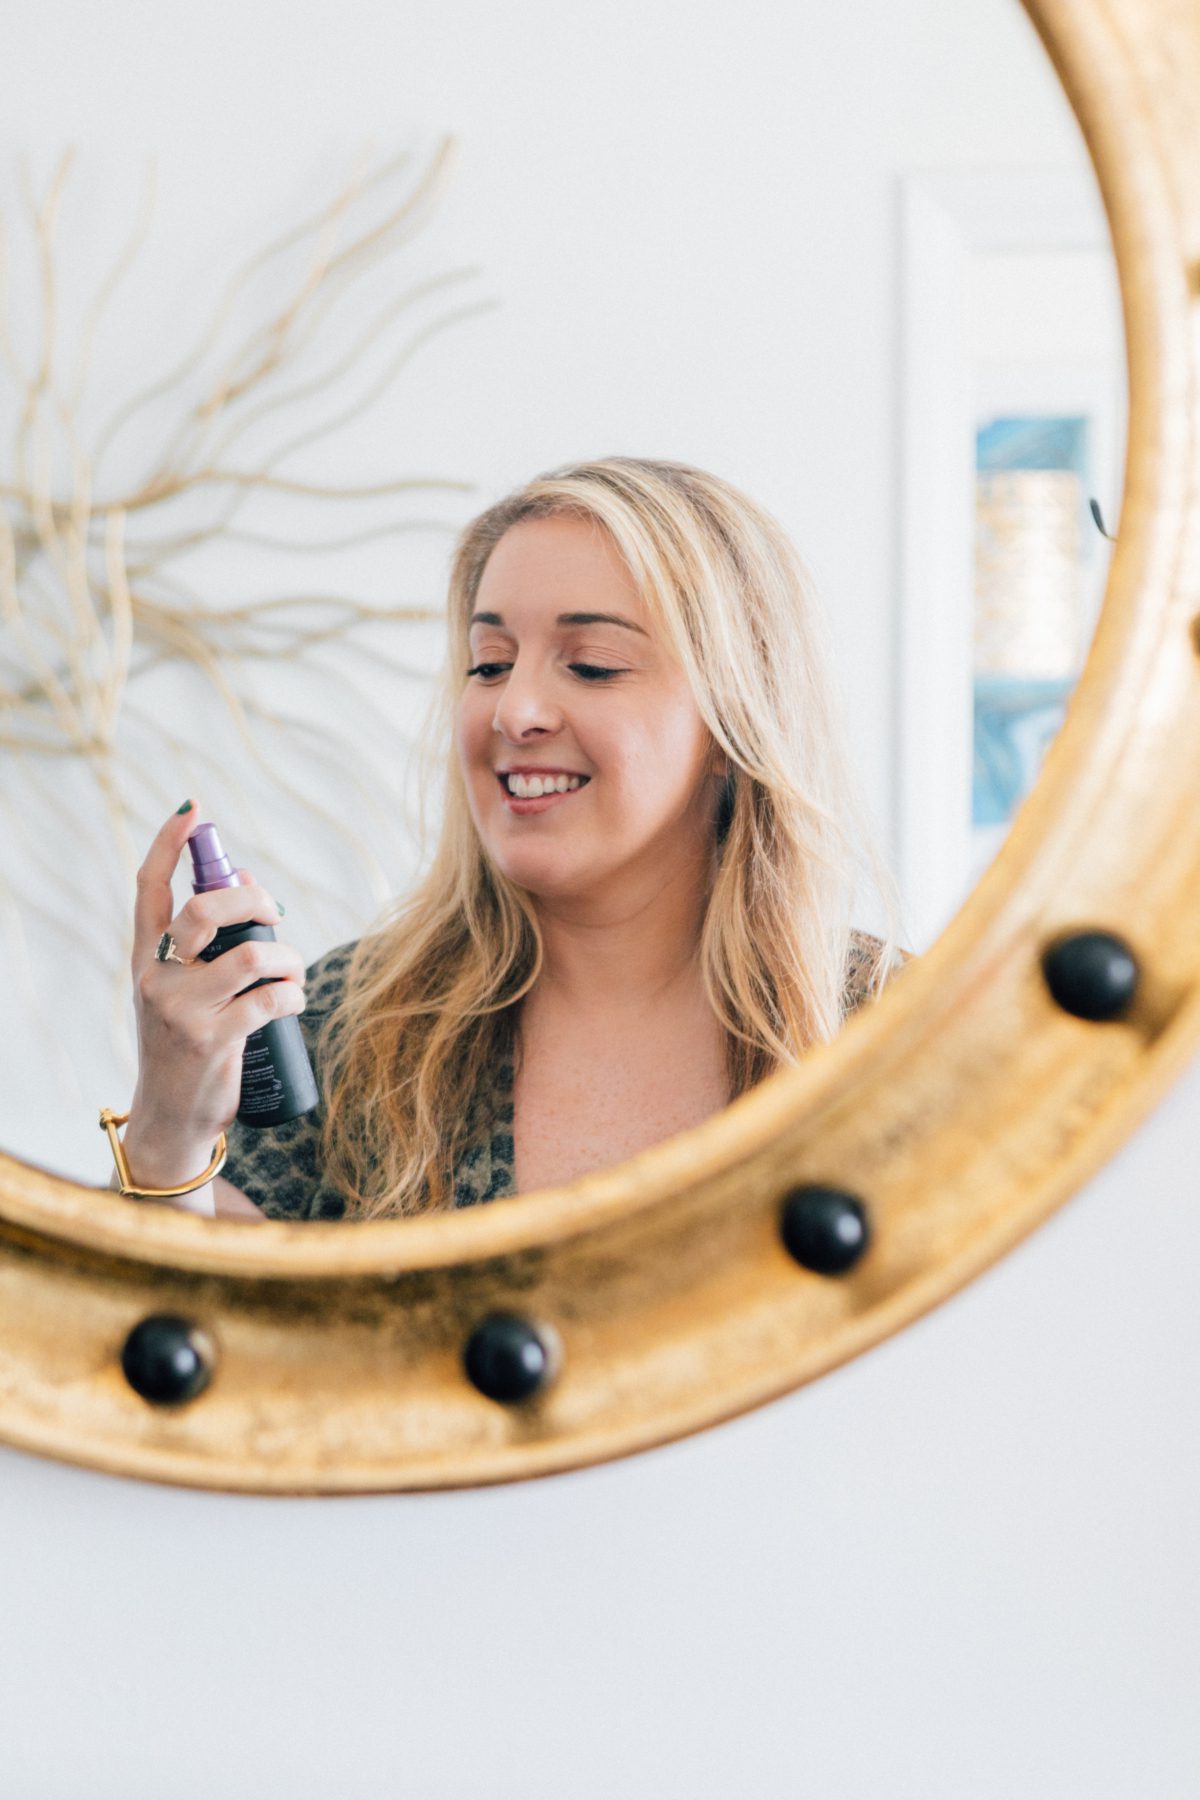 Do Makeup Setting Sprays Really Work? Here's Your Answer.